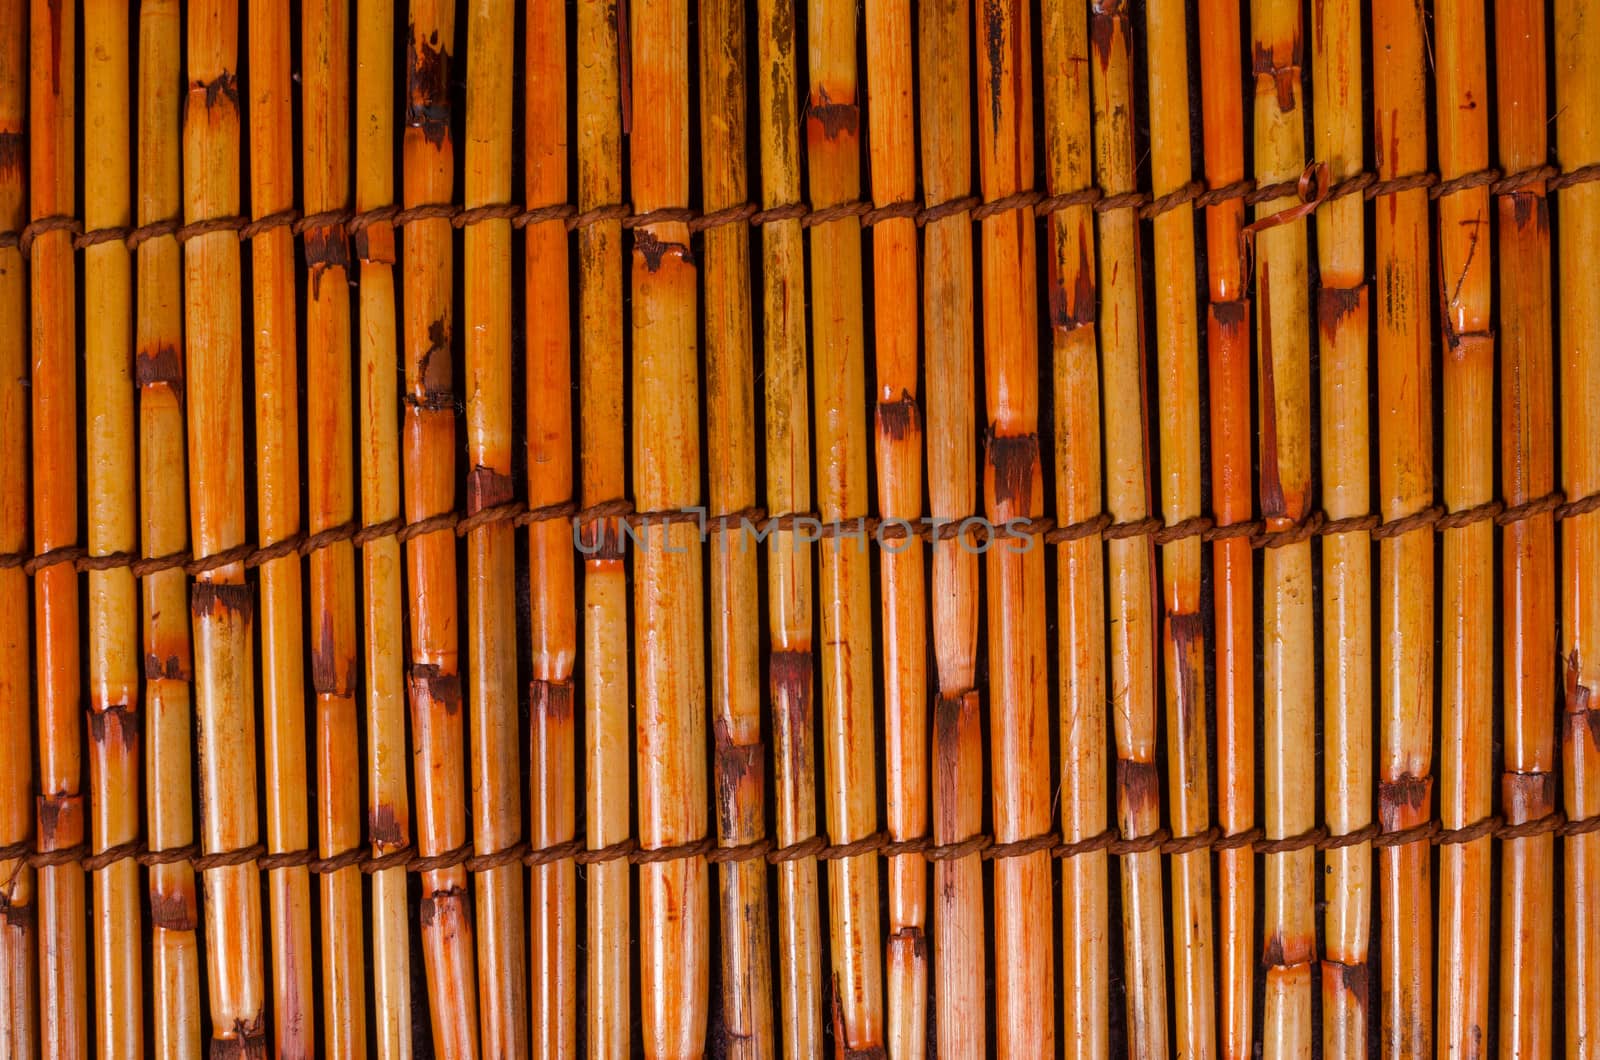 Full frame take of a traditional bamboo mat